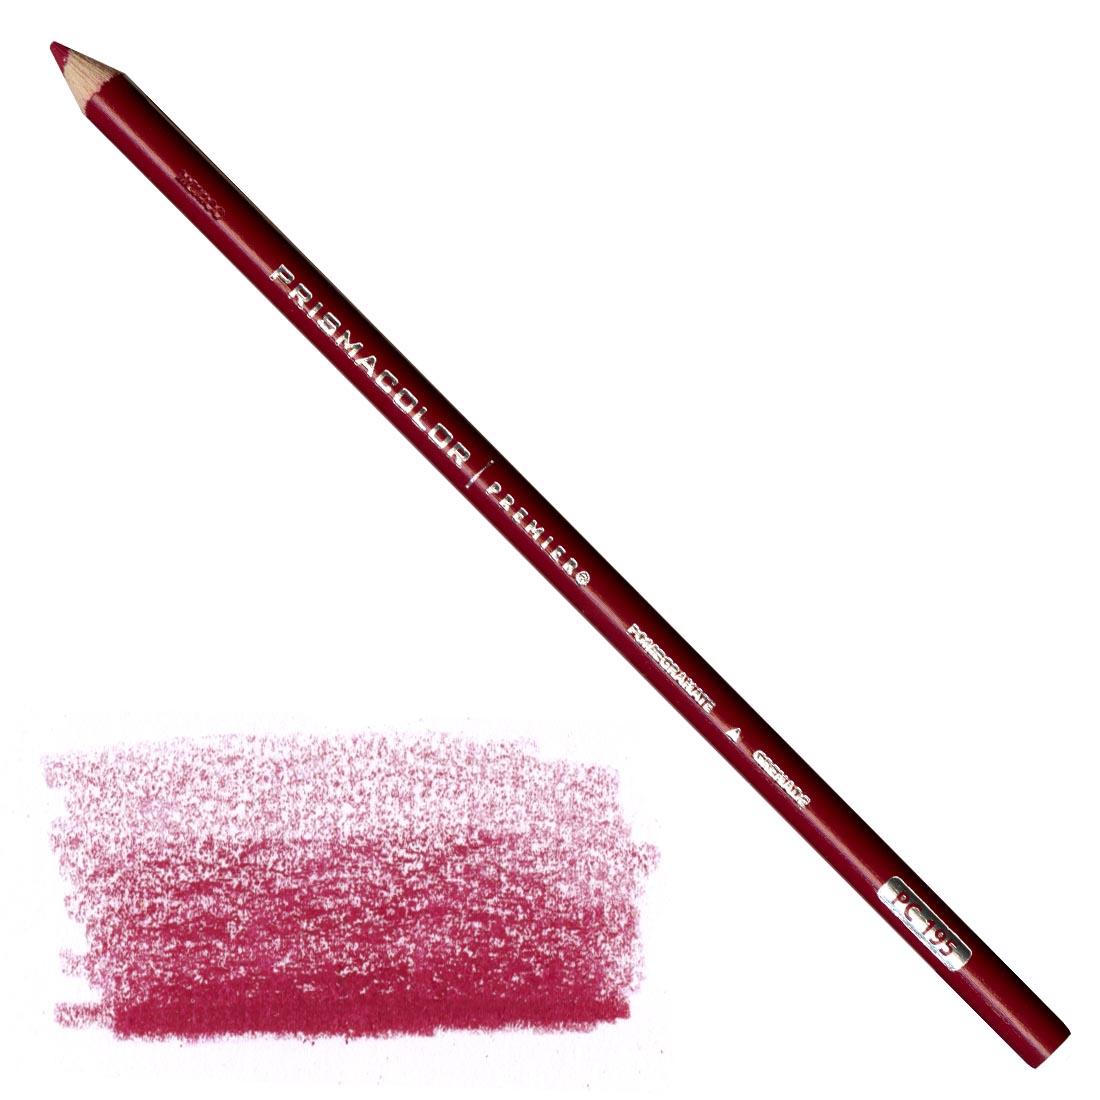 Pomegranate Prismacolor Premier Colored Pencil with a sample colored swatch